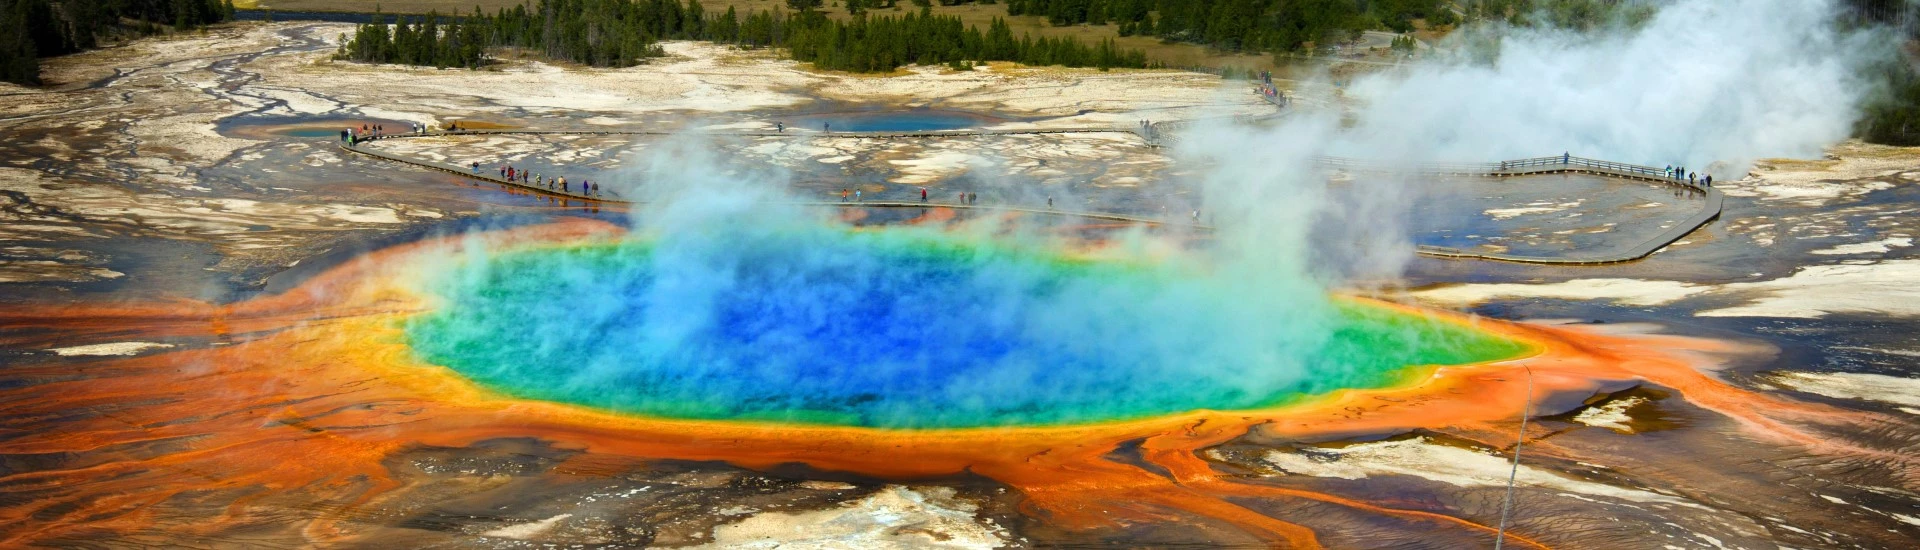 Yellowstone National Park - bright colors of Morning Glory Pool